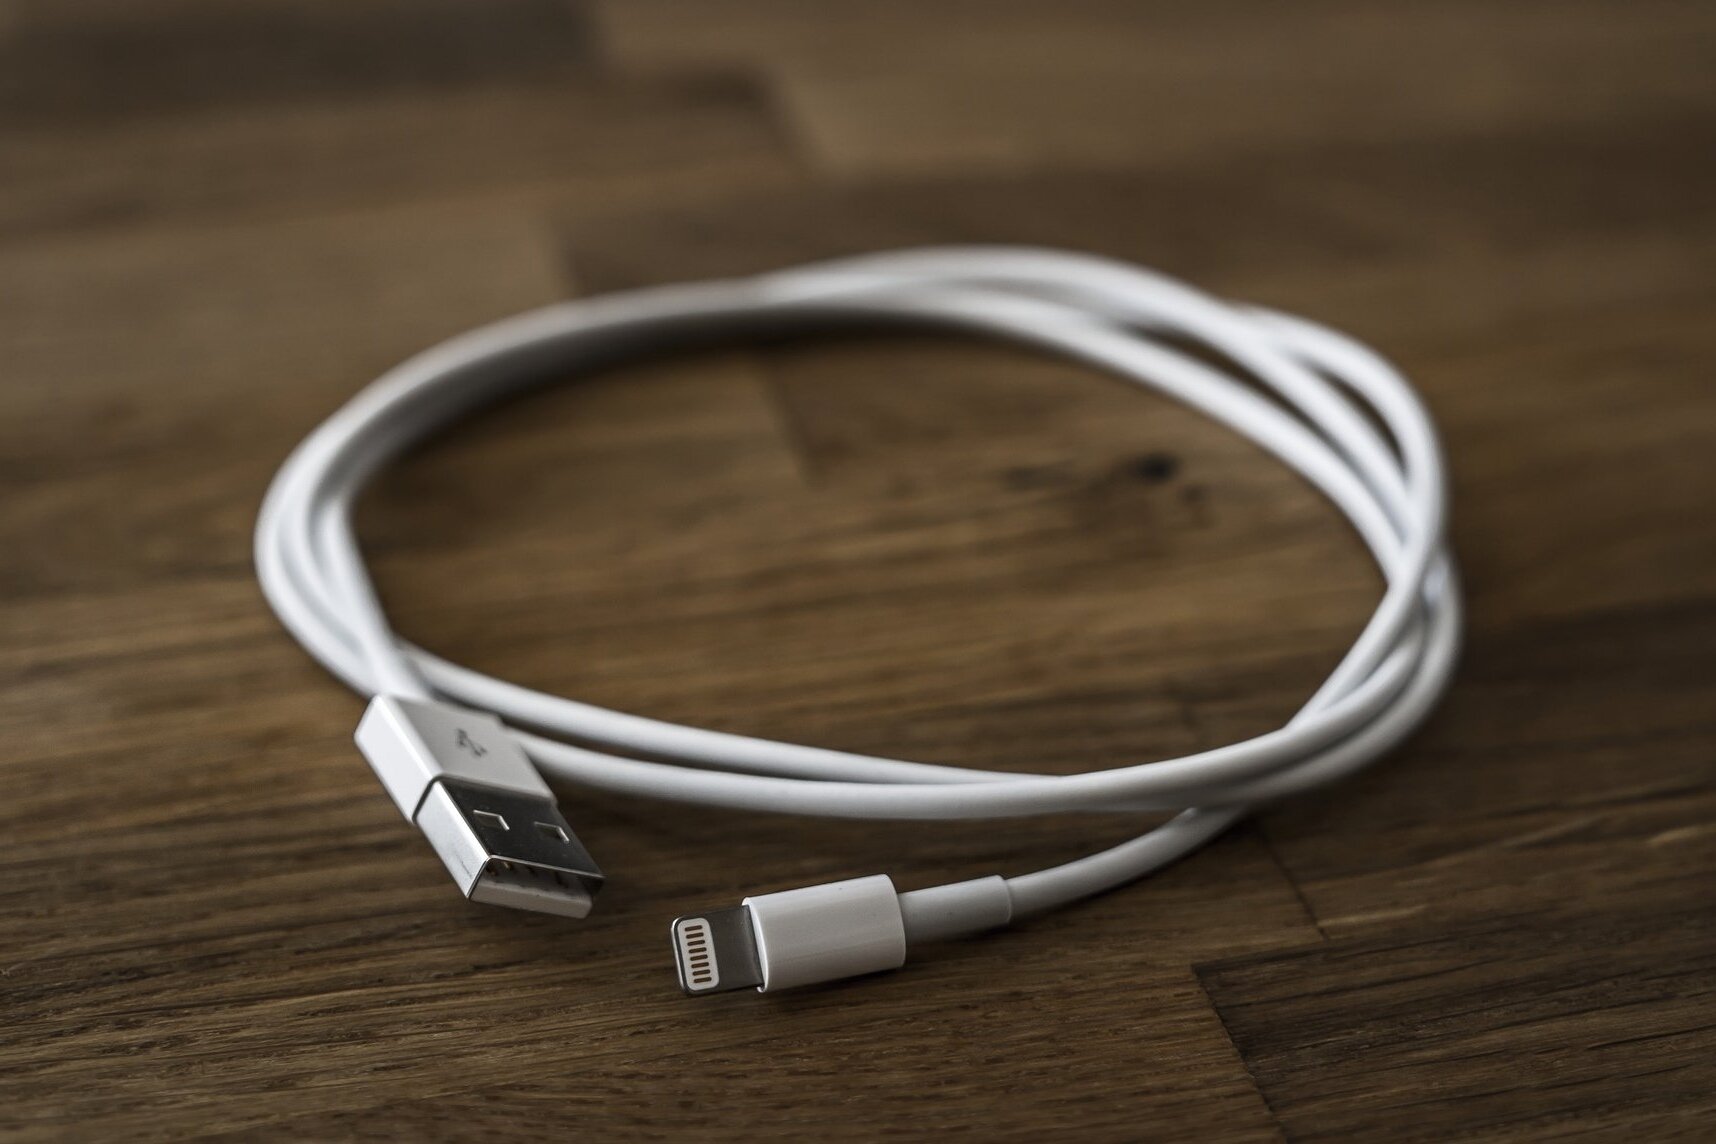 Connecting Devices: Best Cord For IPhone 10 To MacBook Air Retina